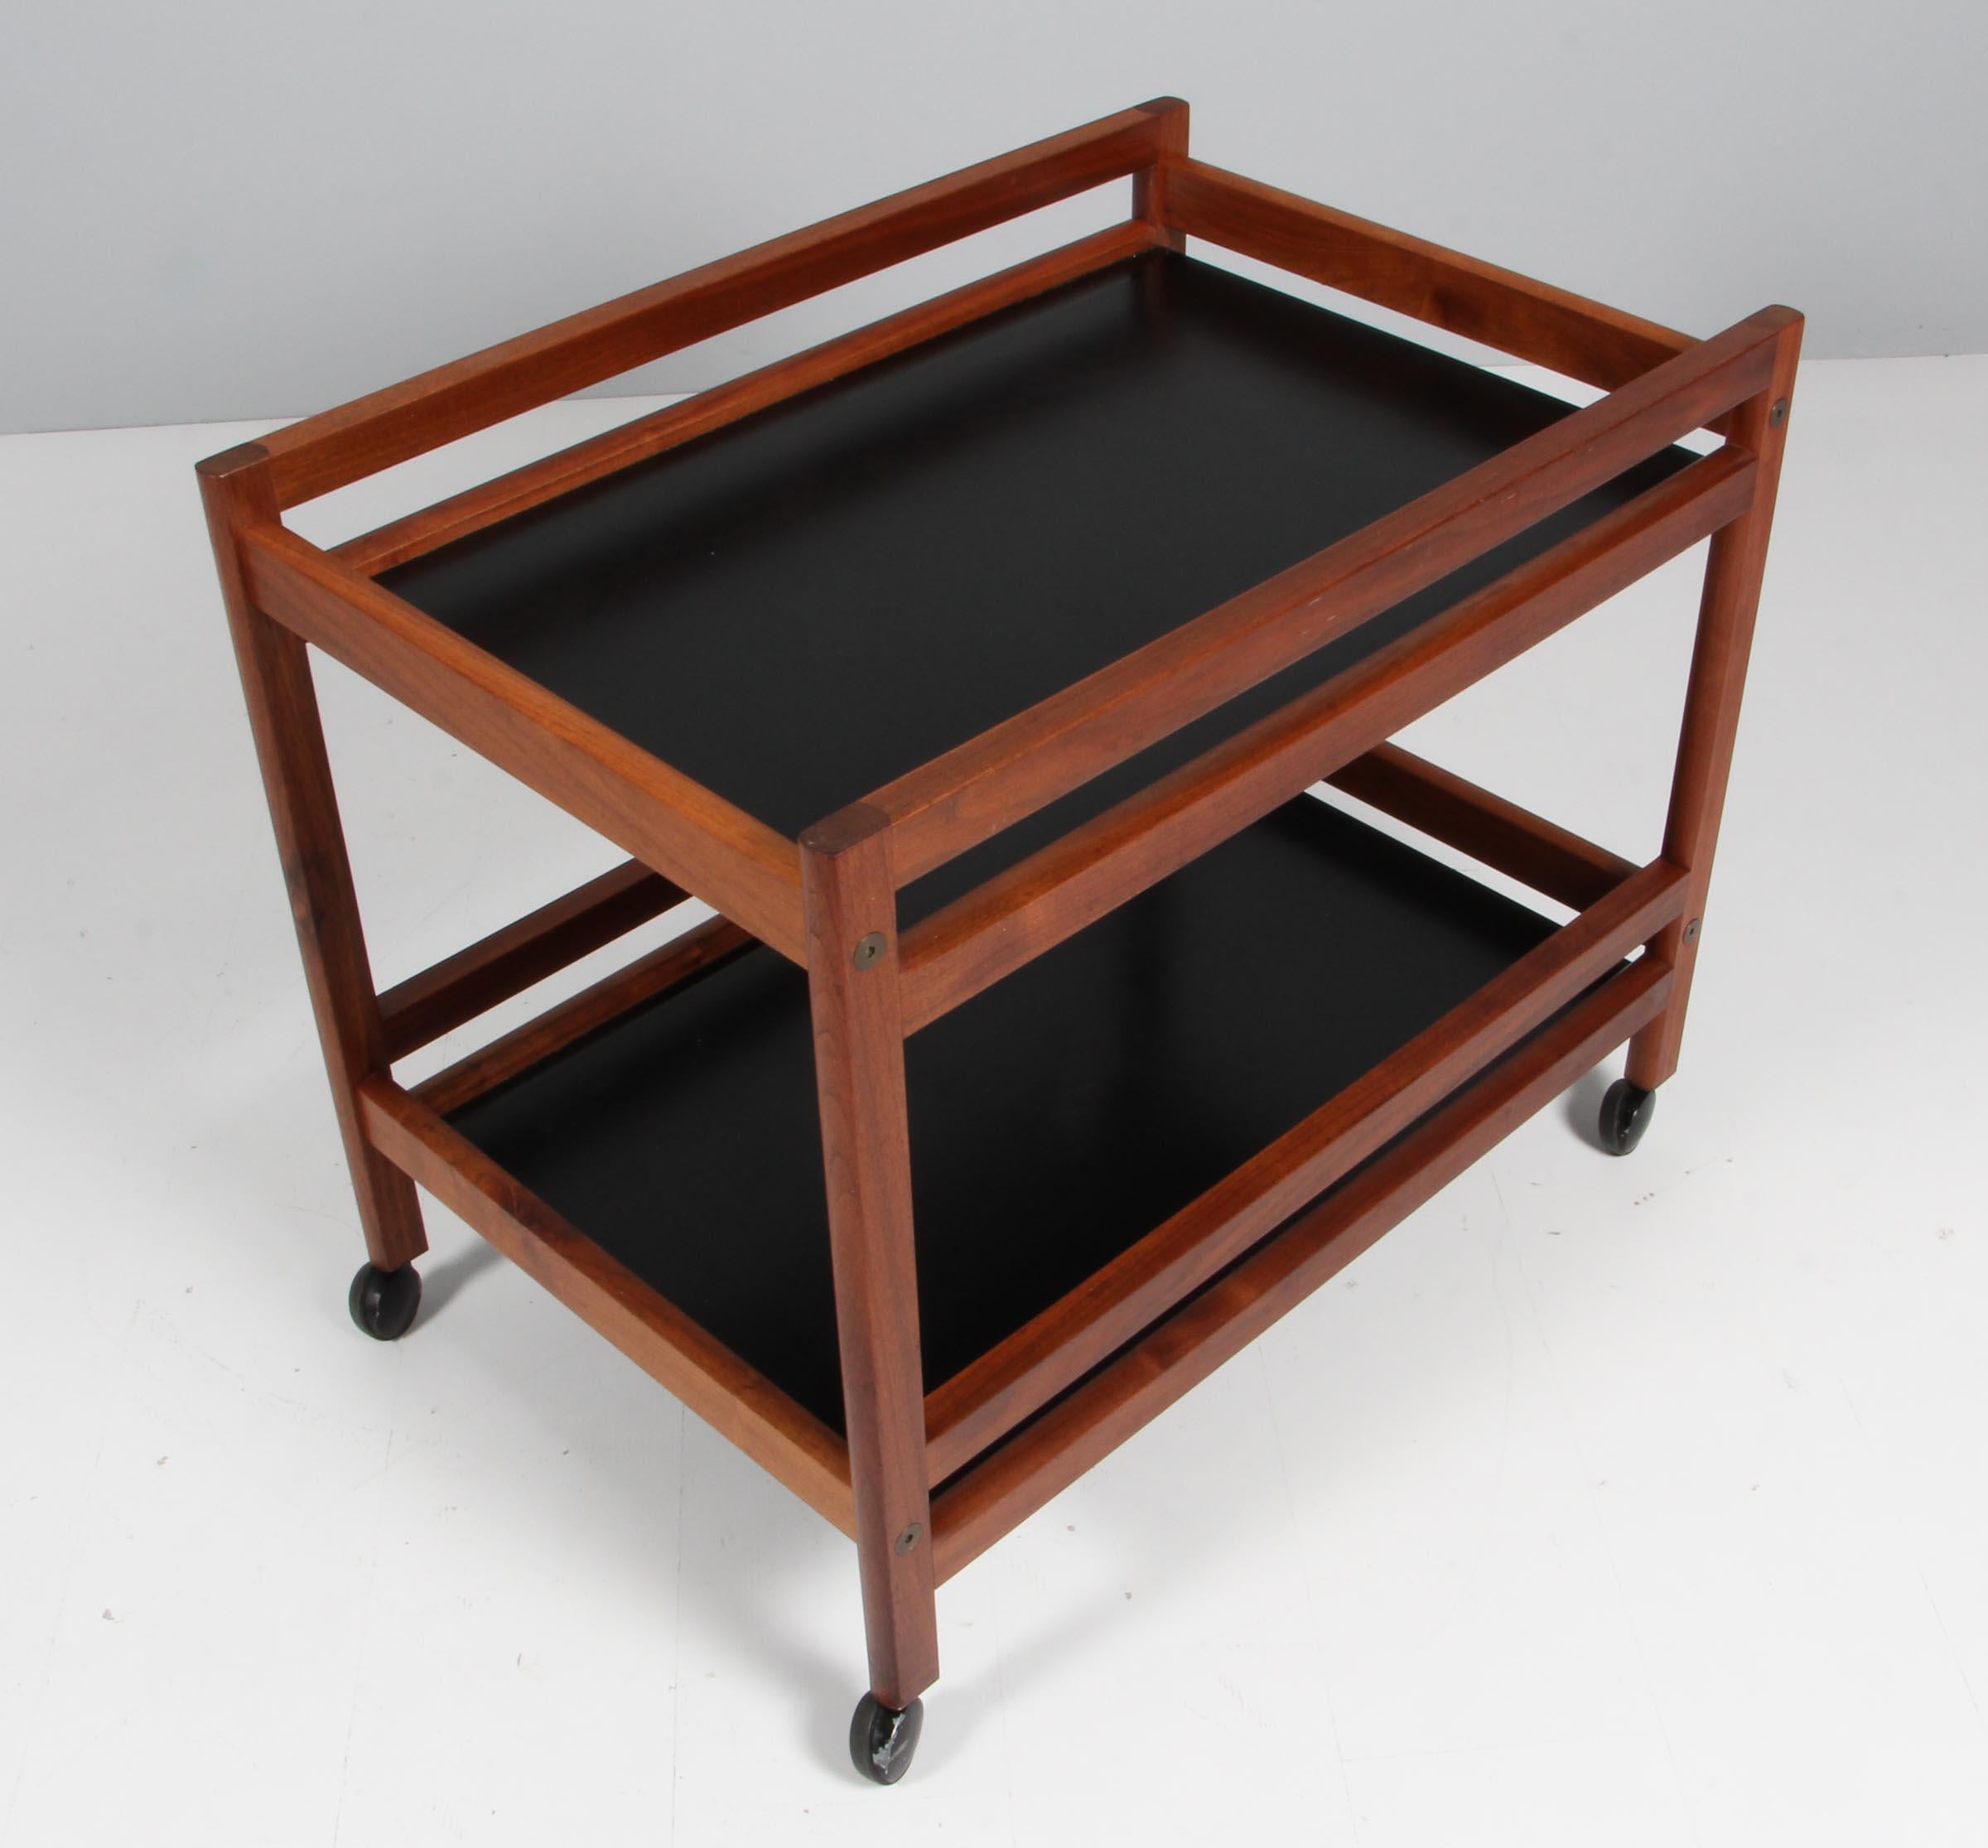 Børge Mogensen tray table with frame of mahogany. Plates of black laminate.

Mounted on wheels.

Model 5370, made by Fredericia Furniture.